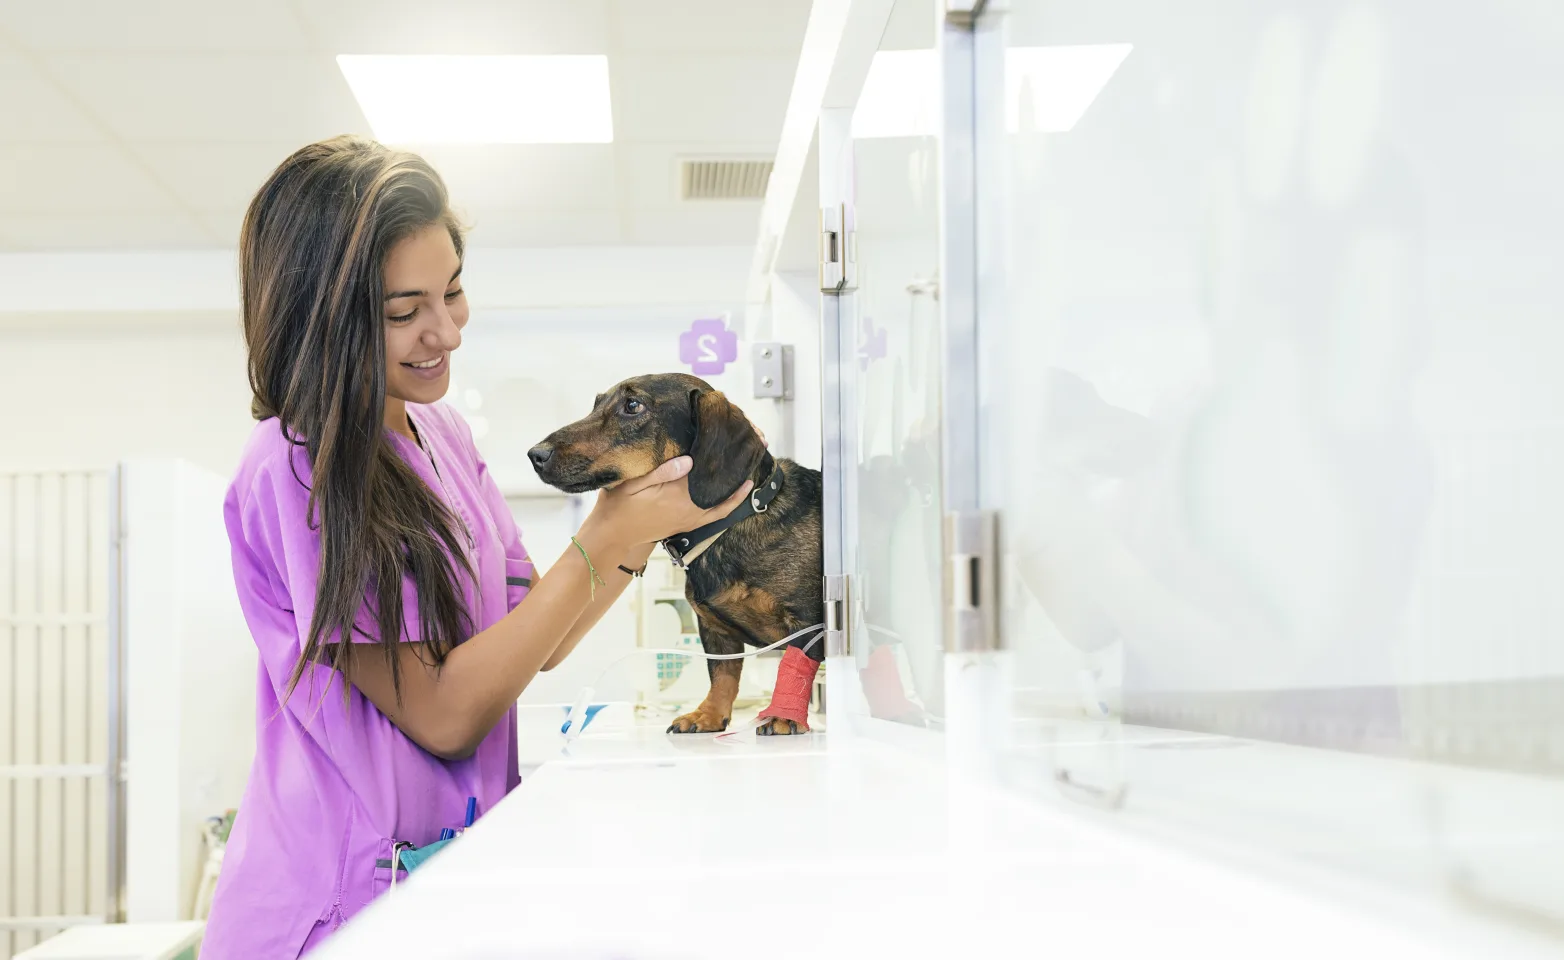 A veterinarian smiling checking in on a dachshund